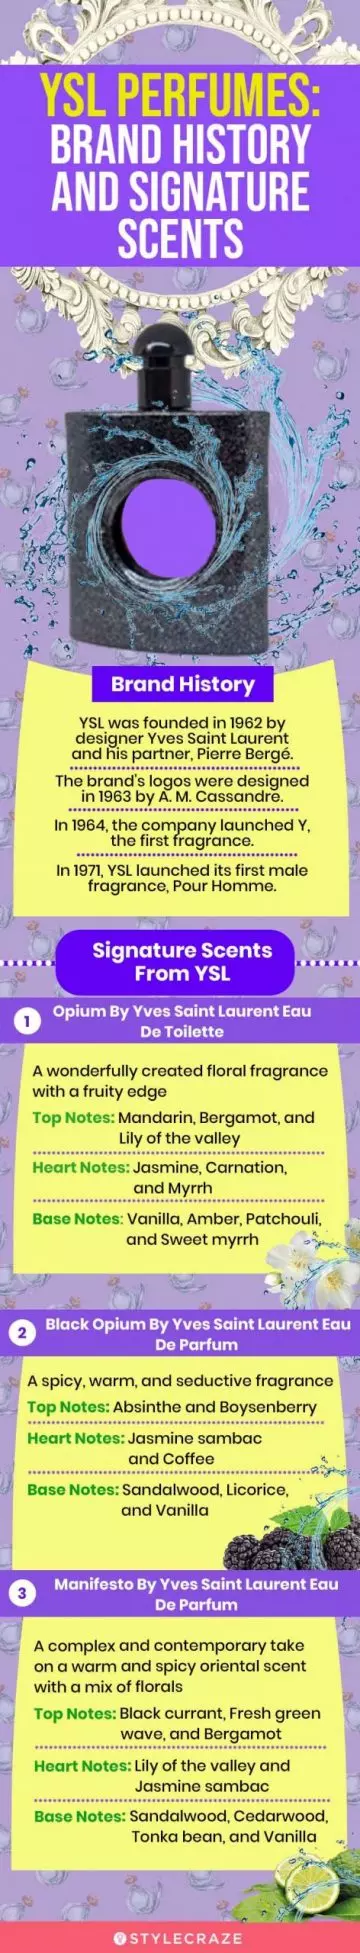 YSL Perfumes: Brand History and Signature Scents